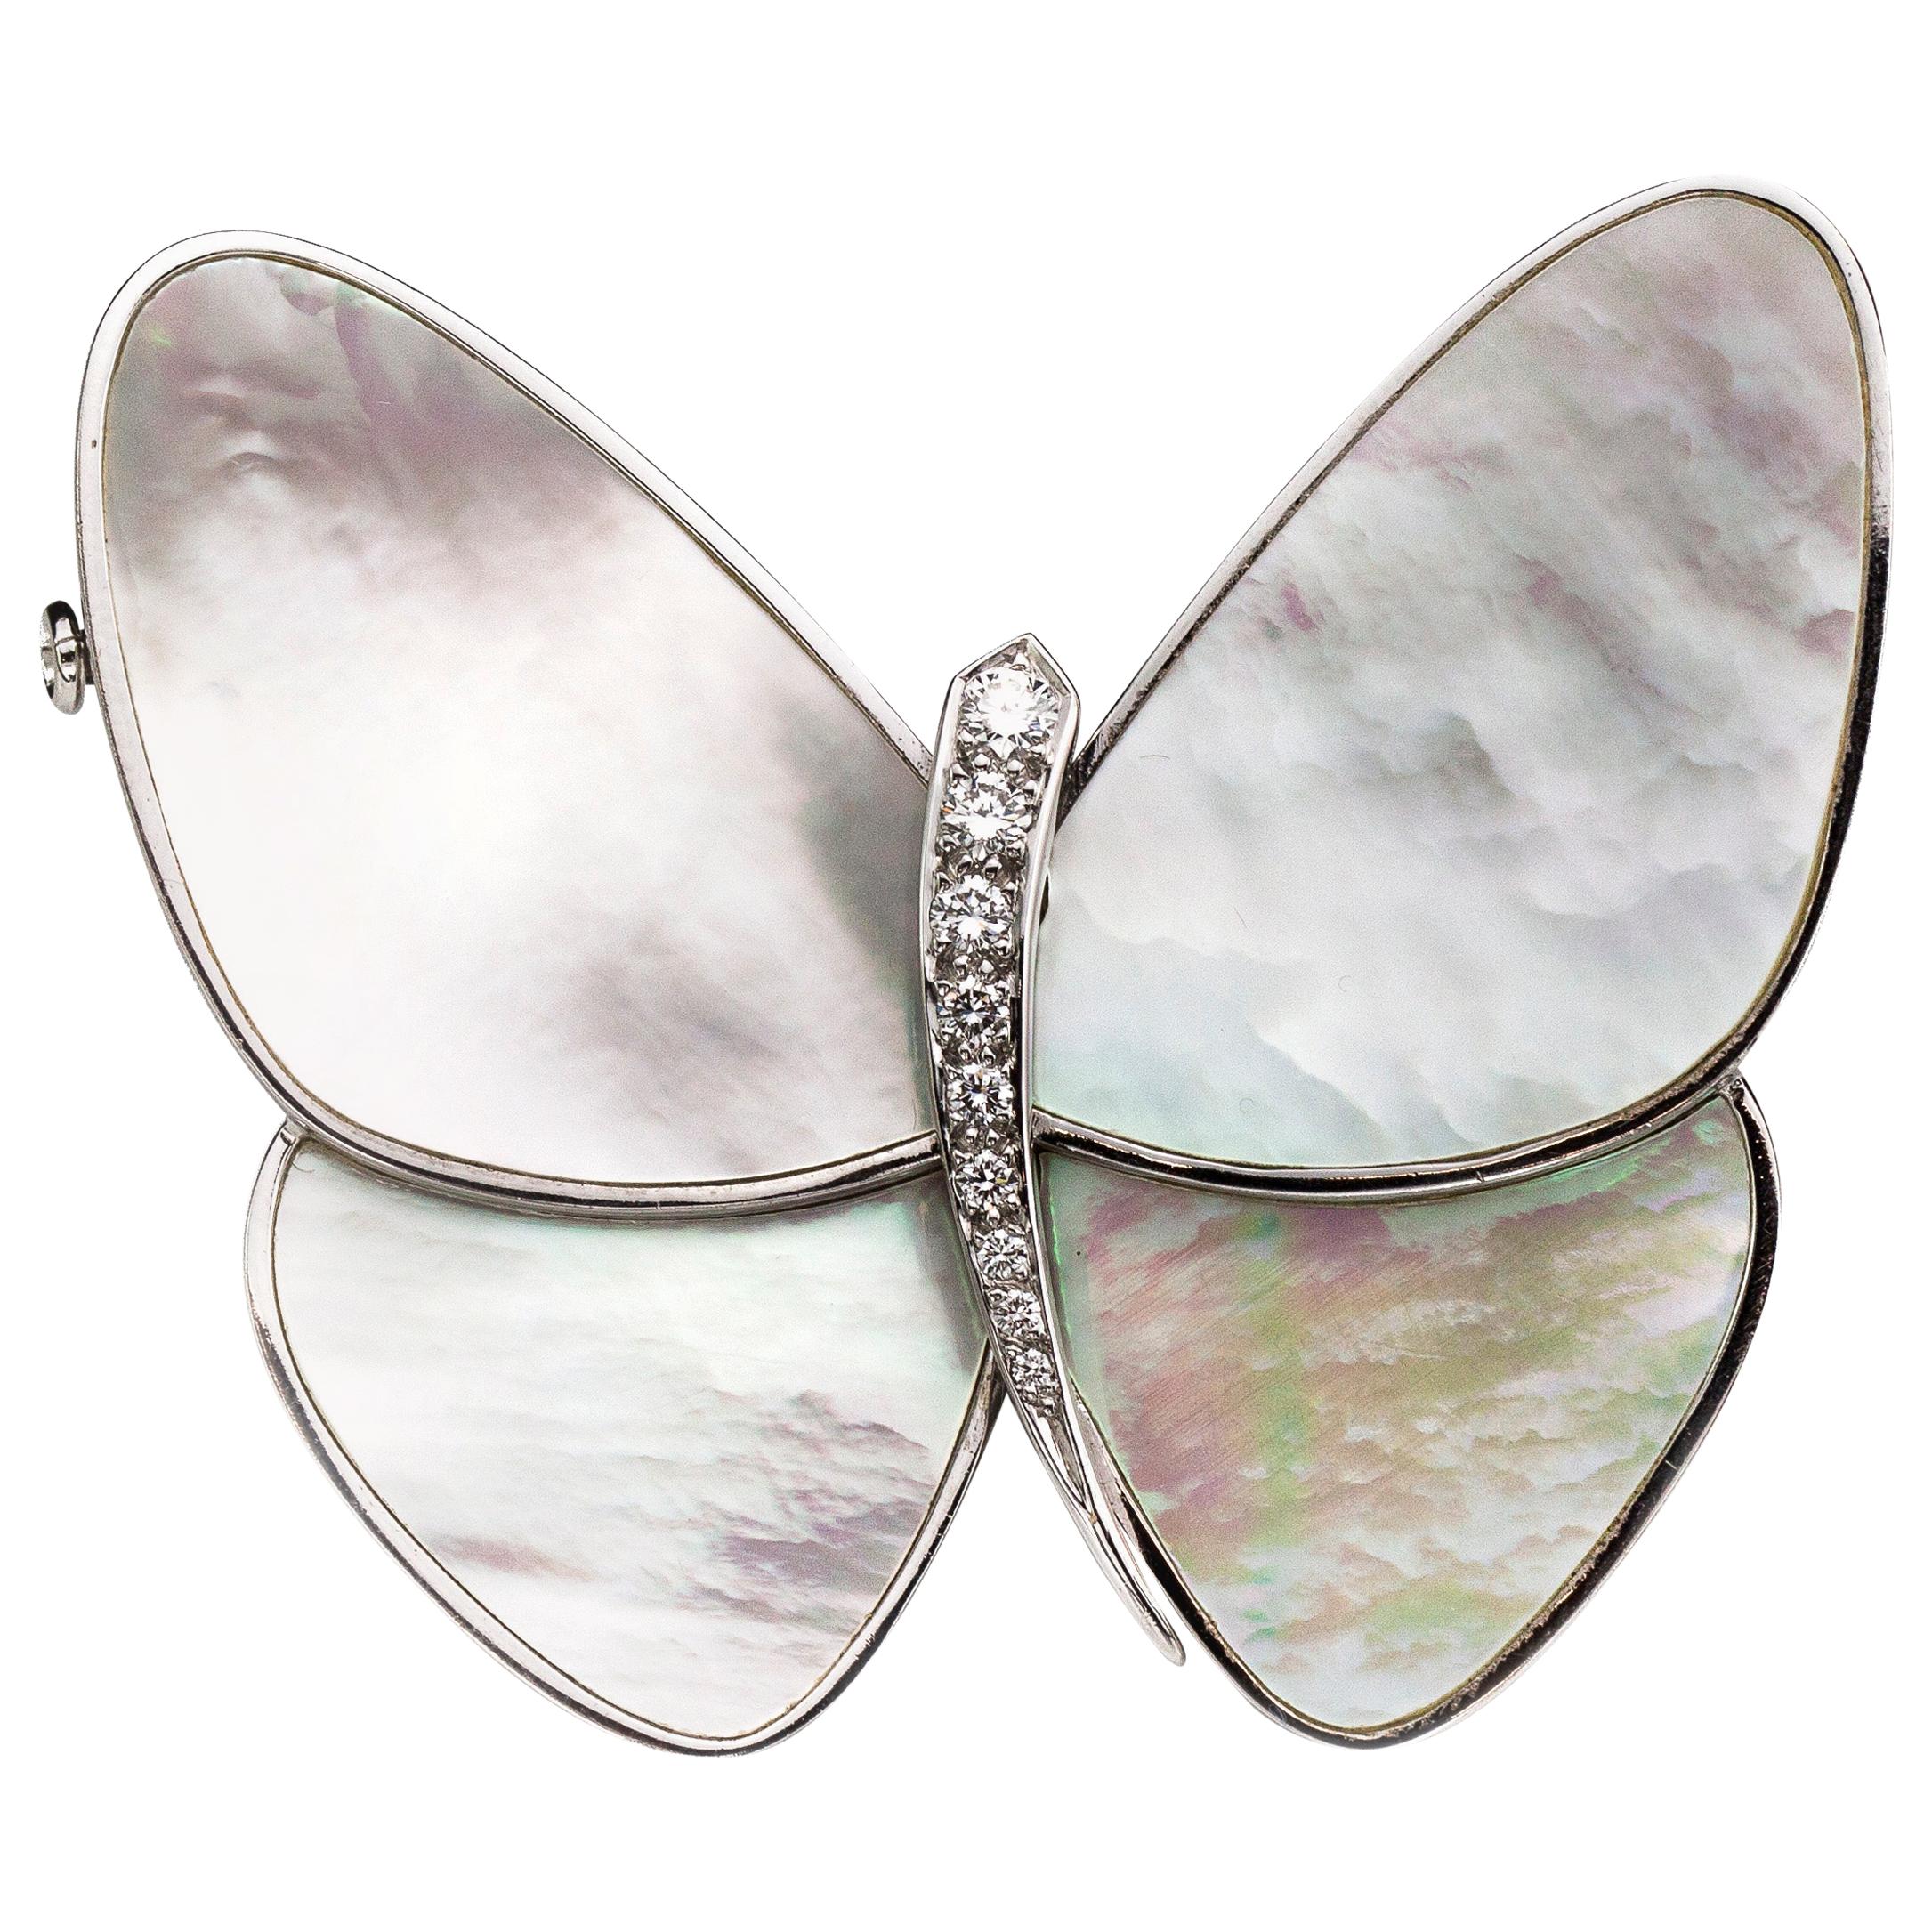 Van Cleef & Arpels, 18 Karat White Gold and Mother of Pearl Butterfly Brooch